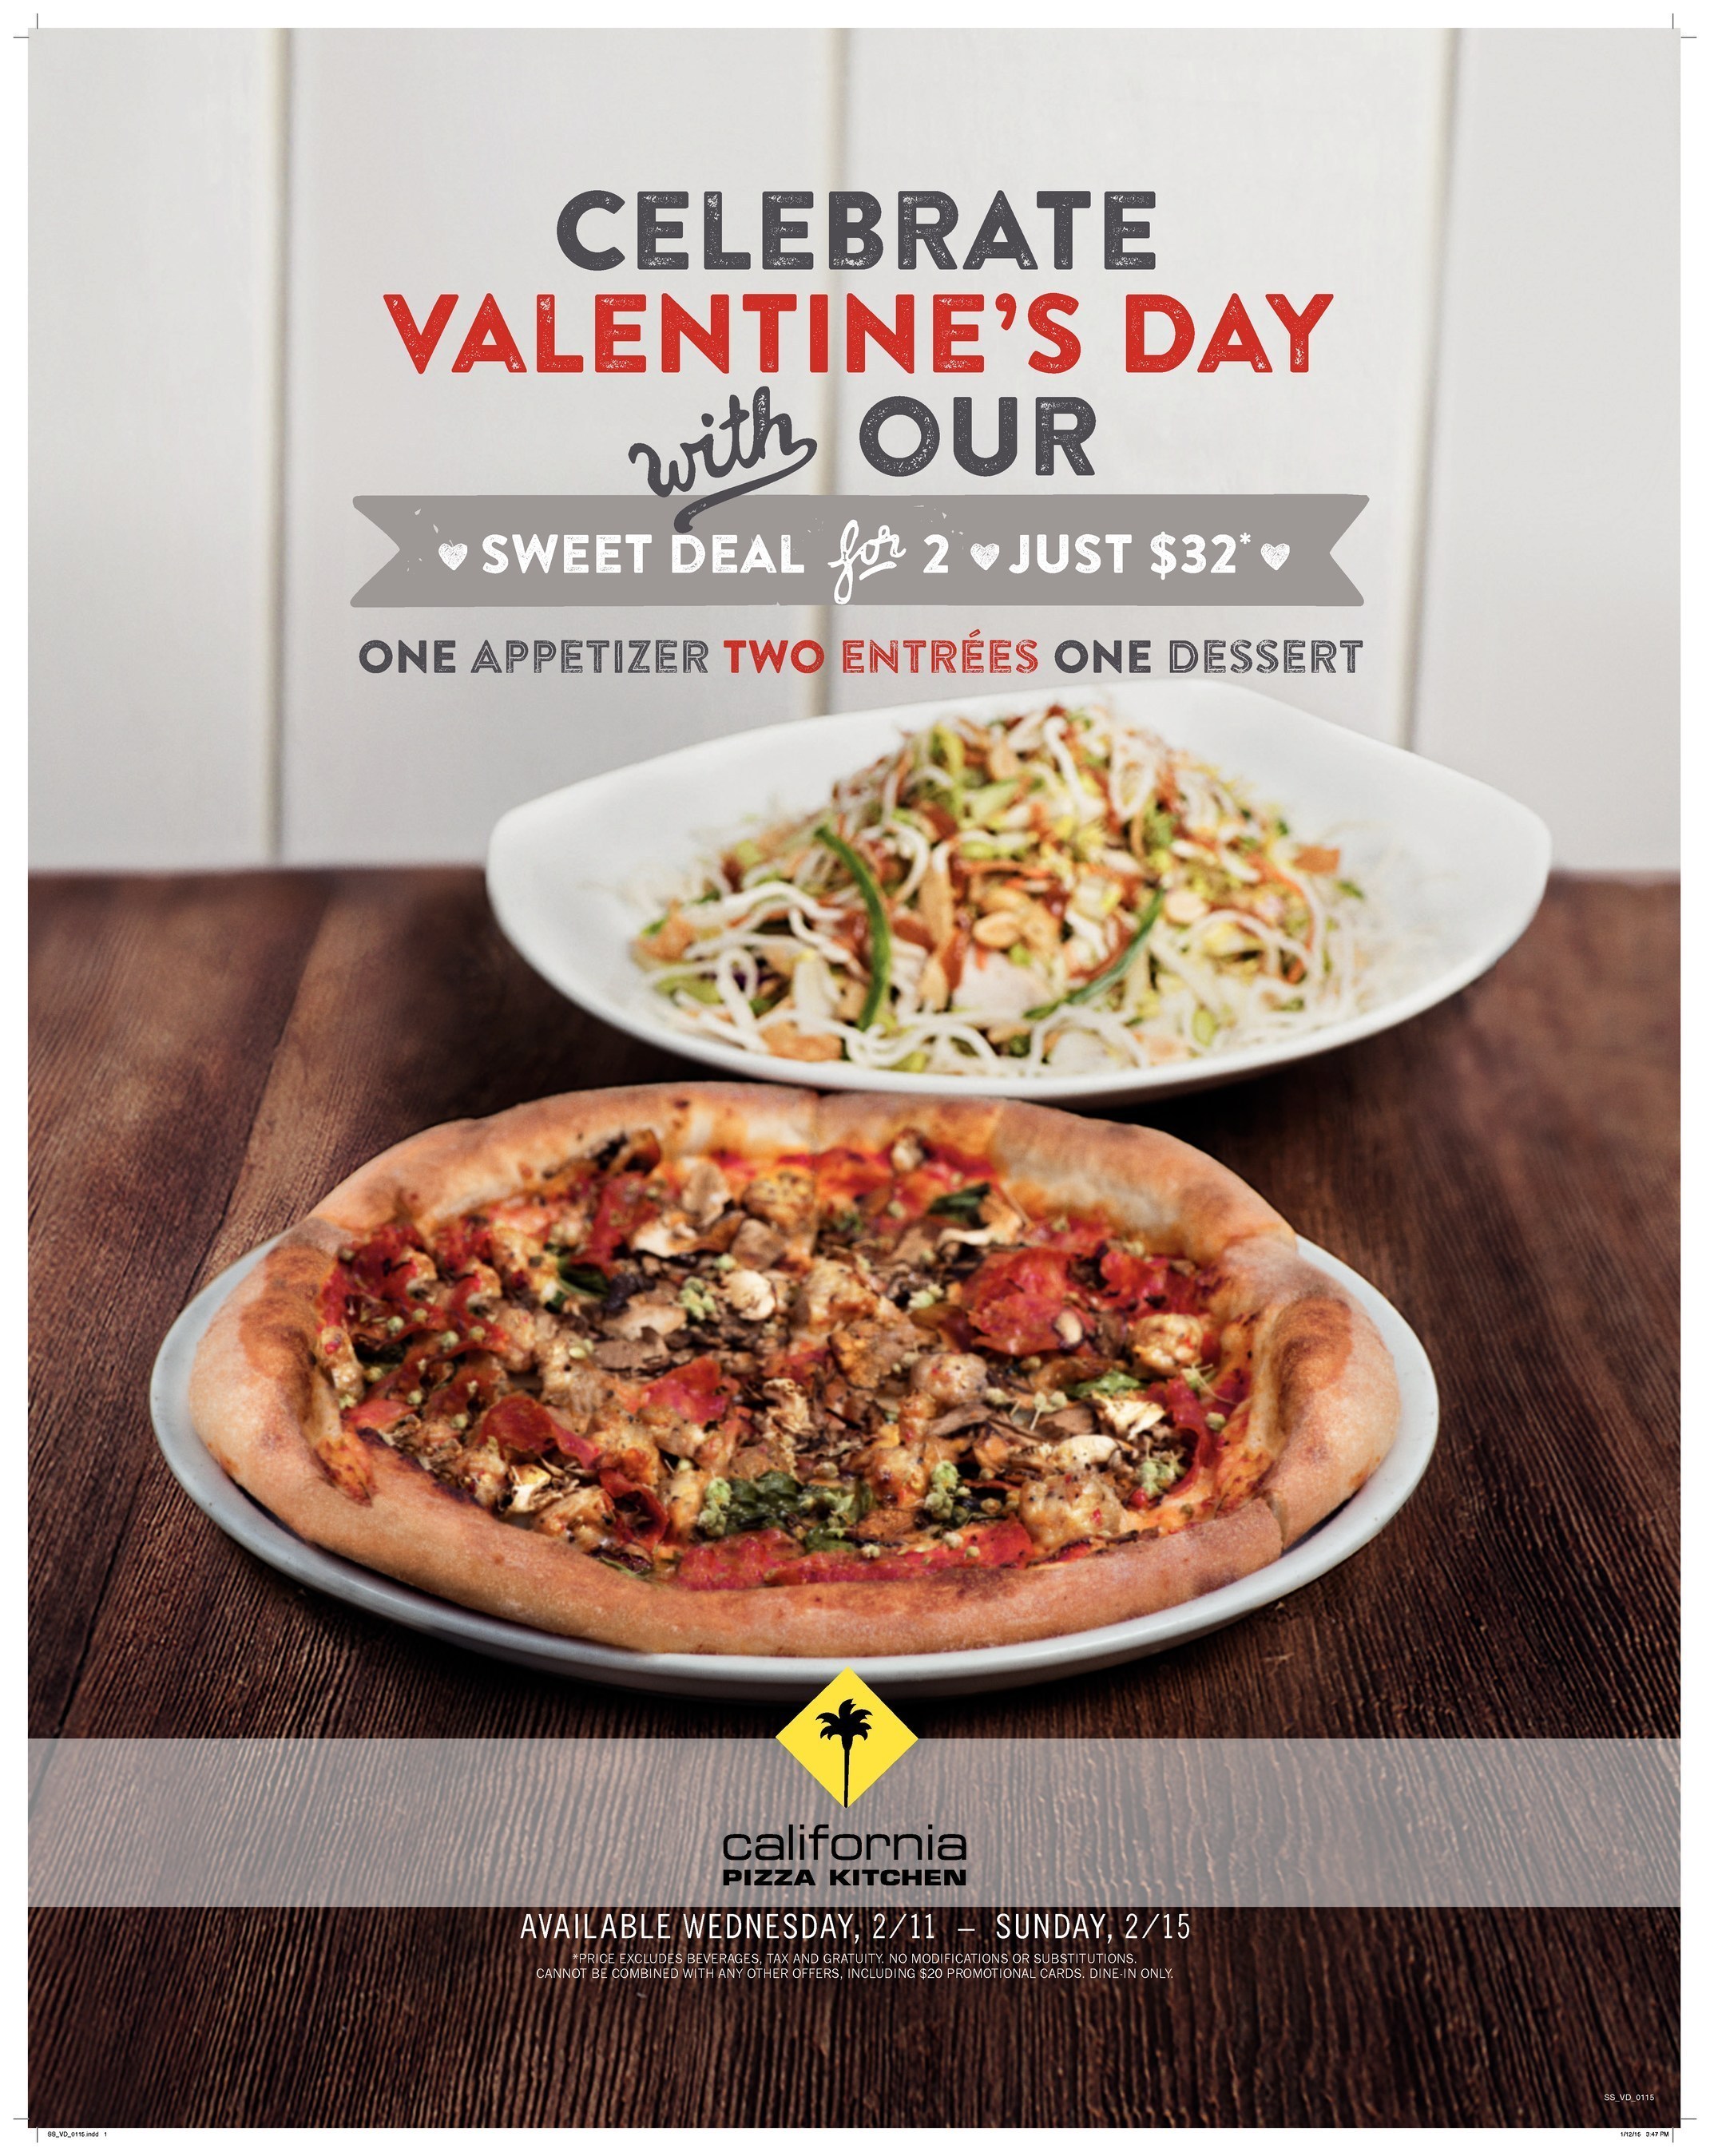 CPK's Valentine's Day Sweet Deal for Two